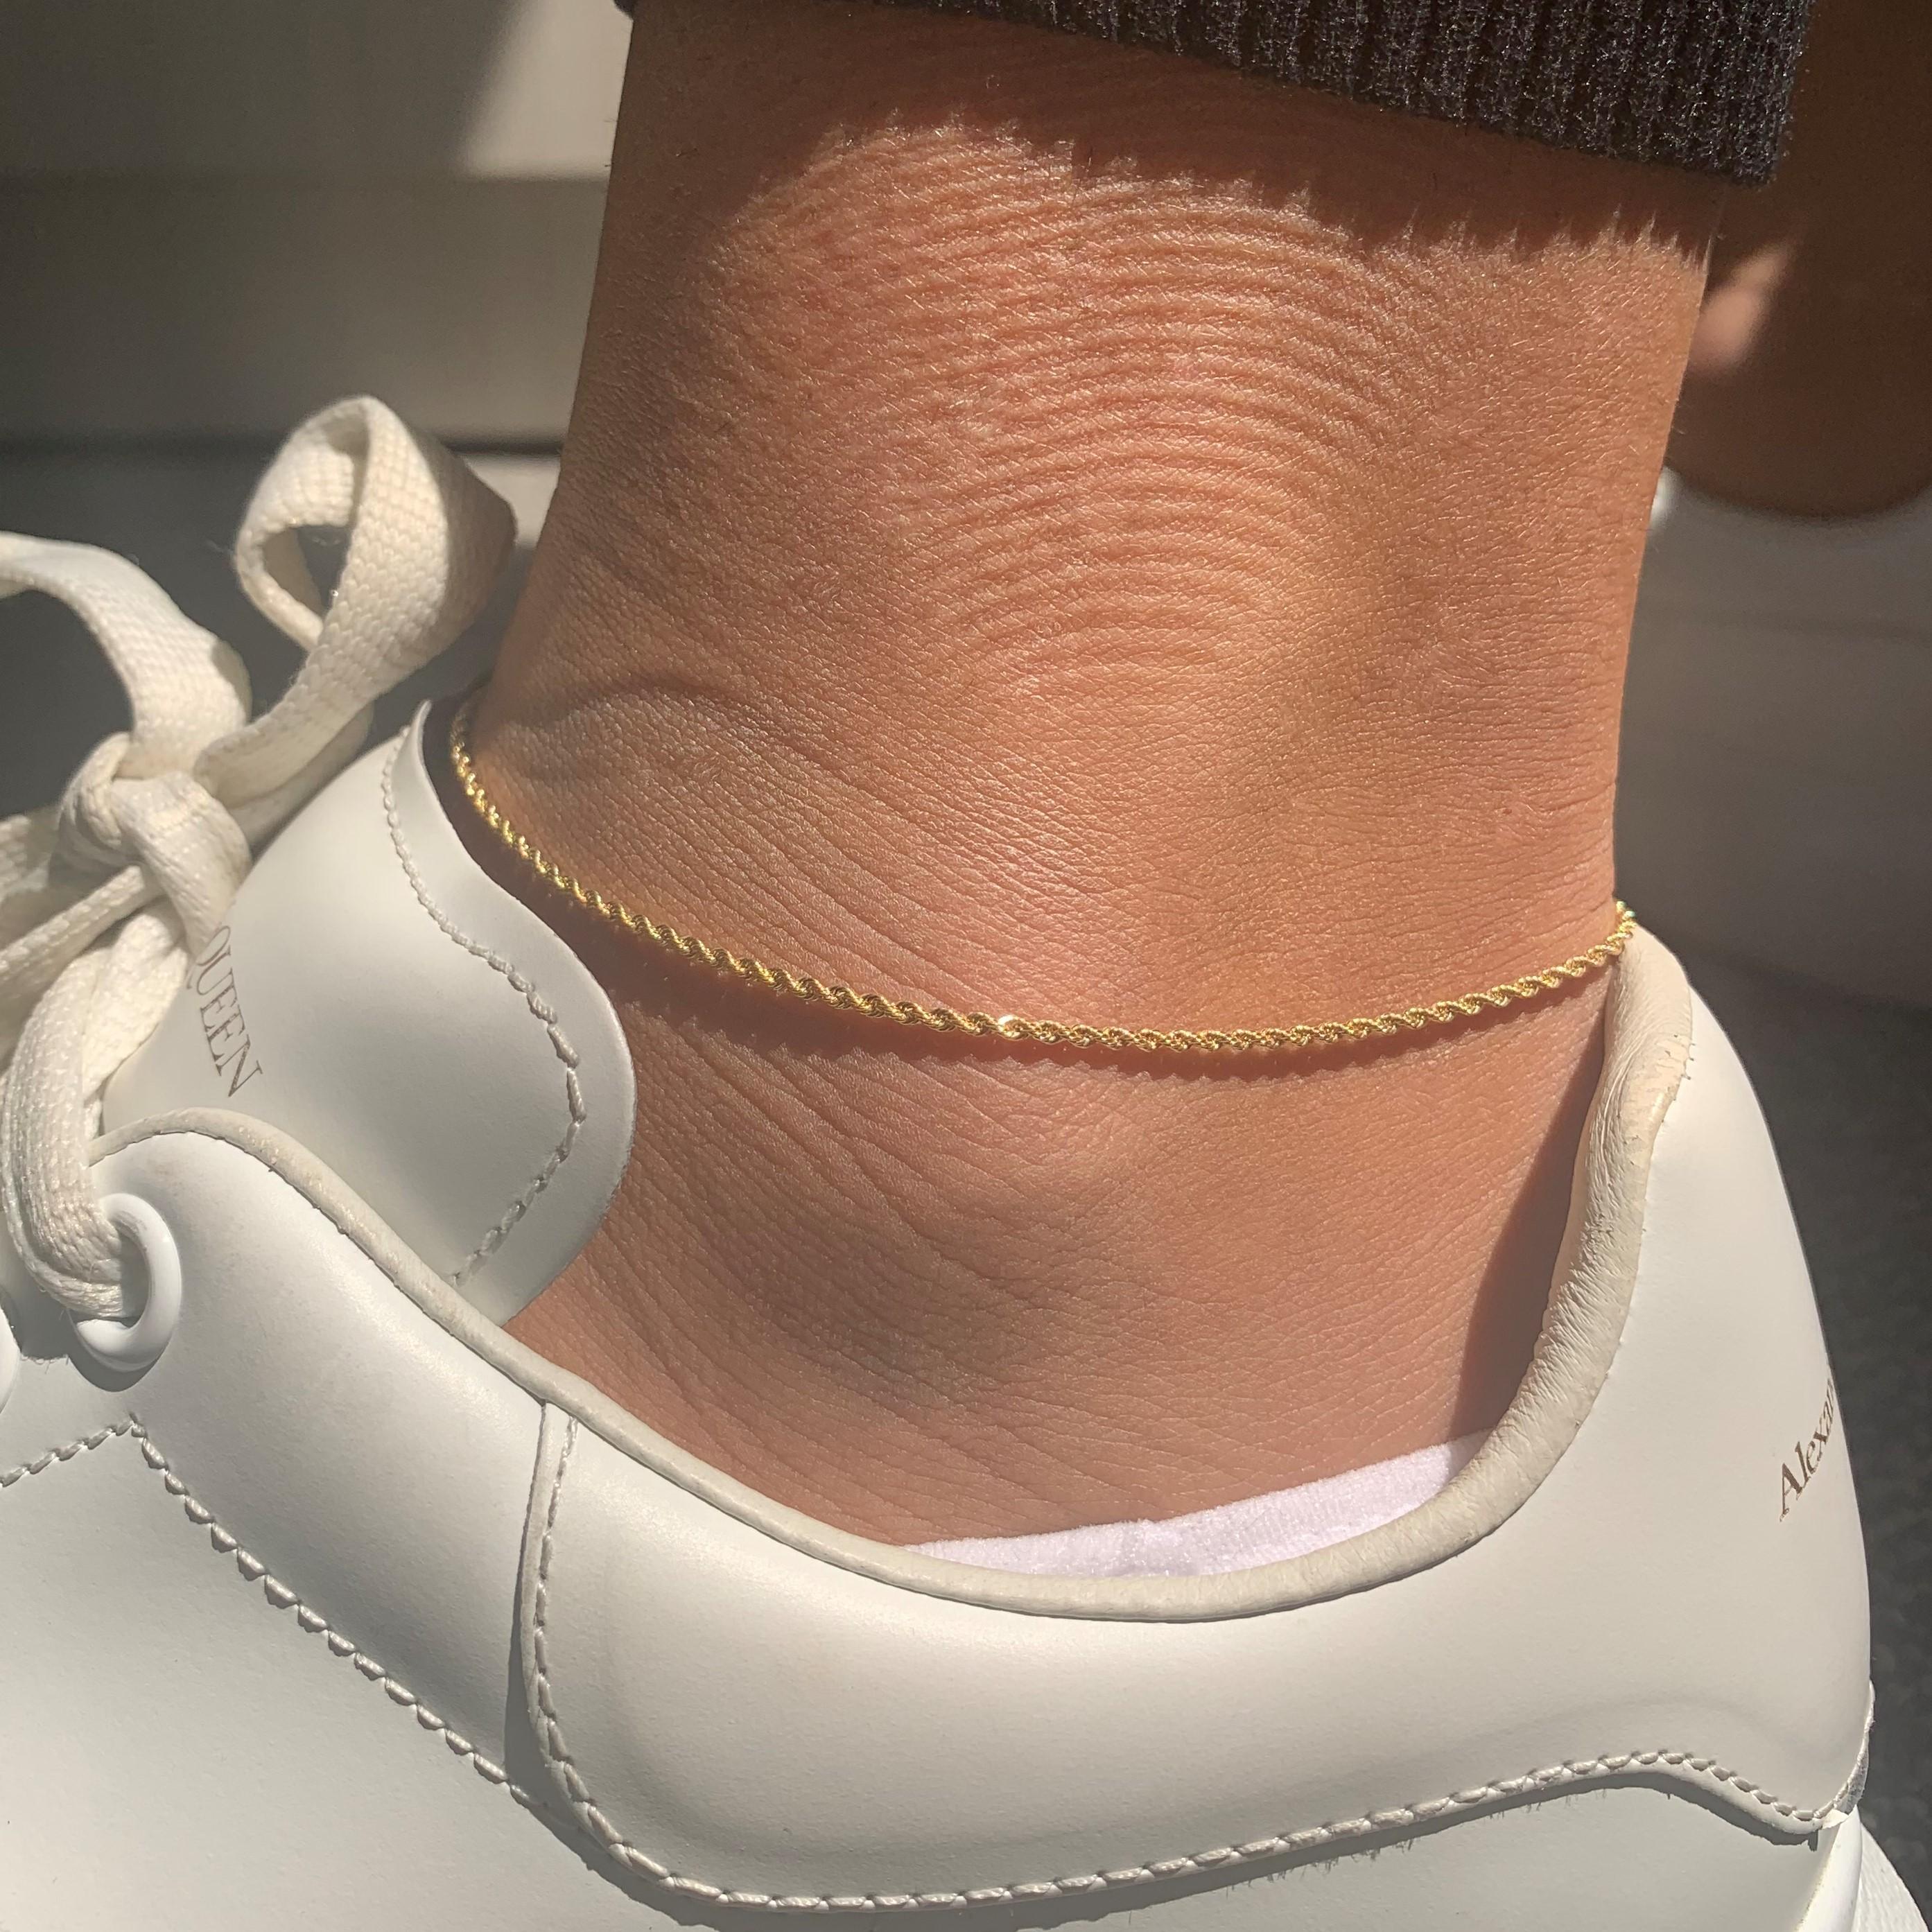 Rope Chain Anklet: This Simple & Beautiful Rope Chain anklet is measured 9-10